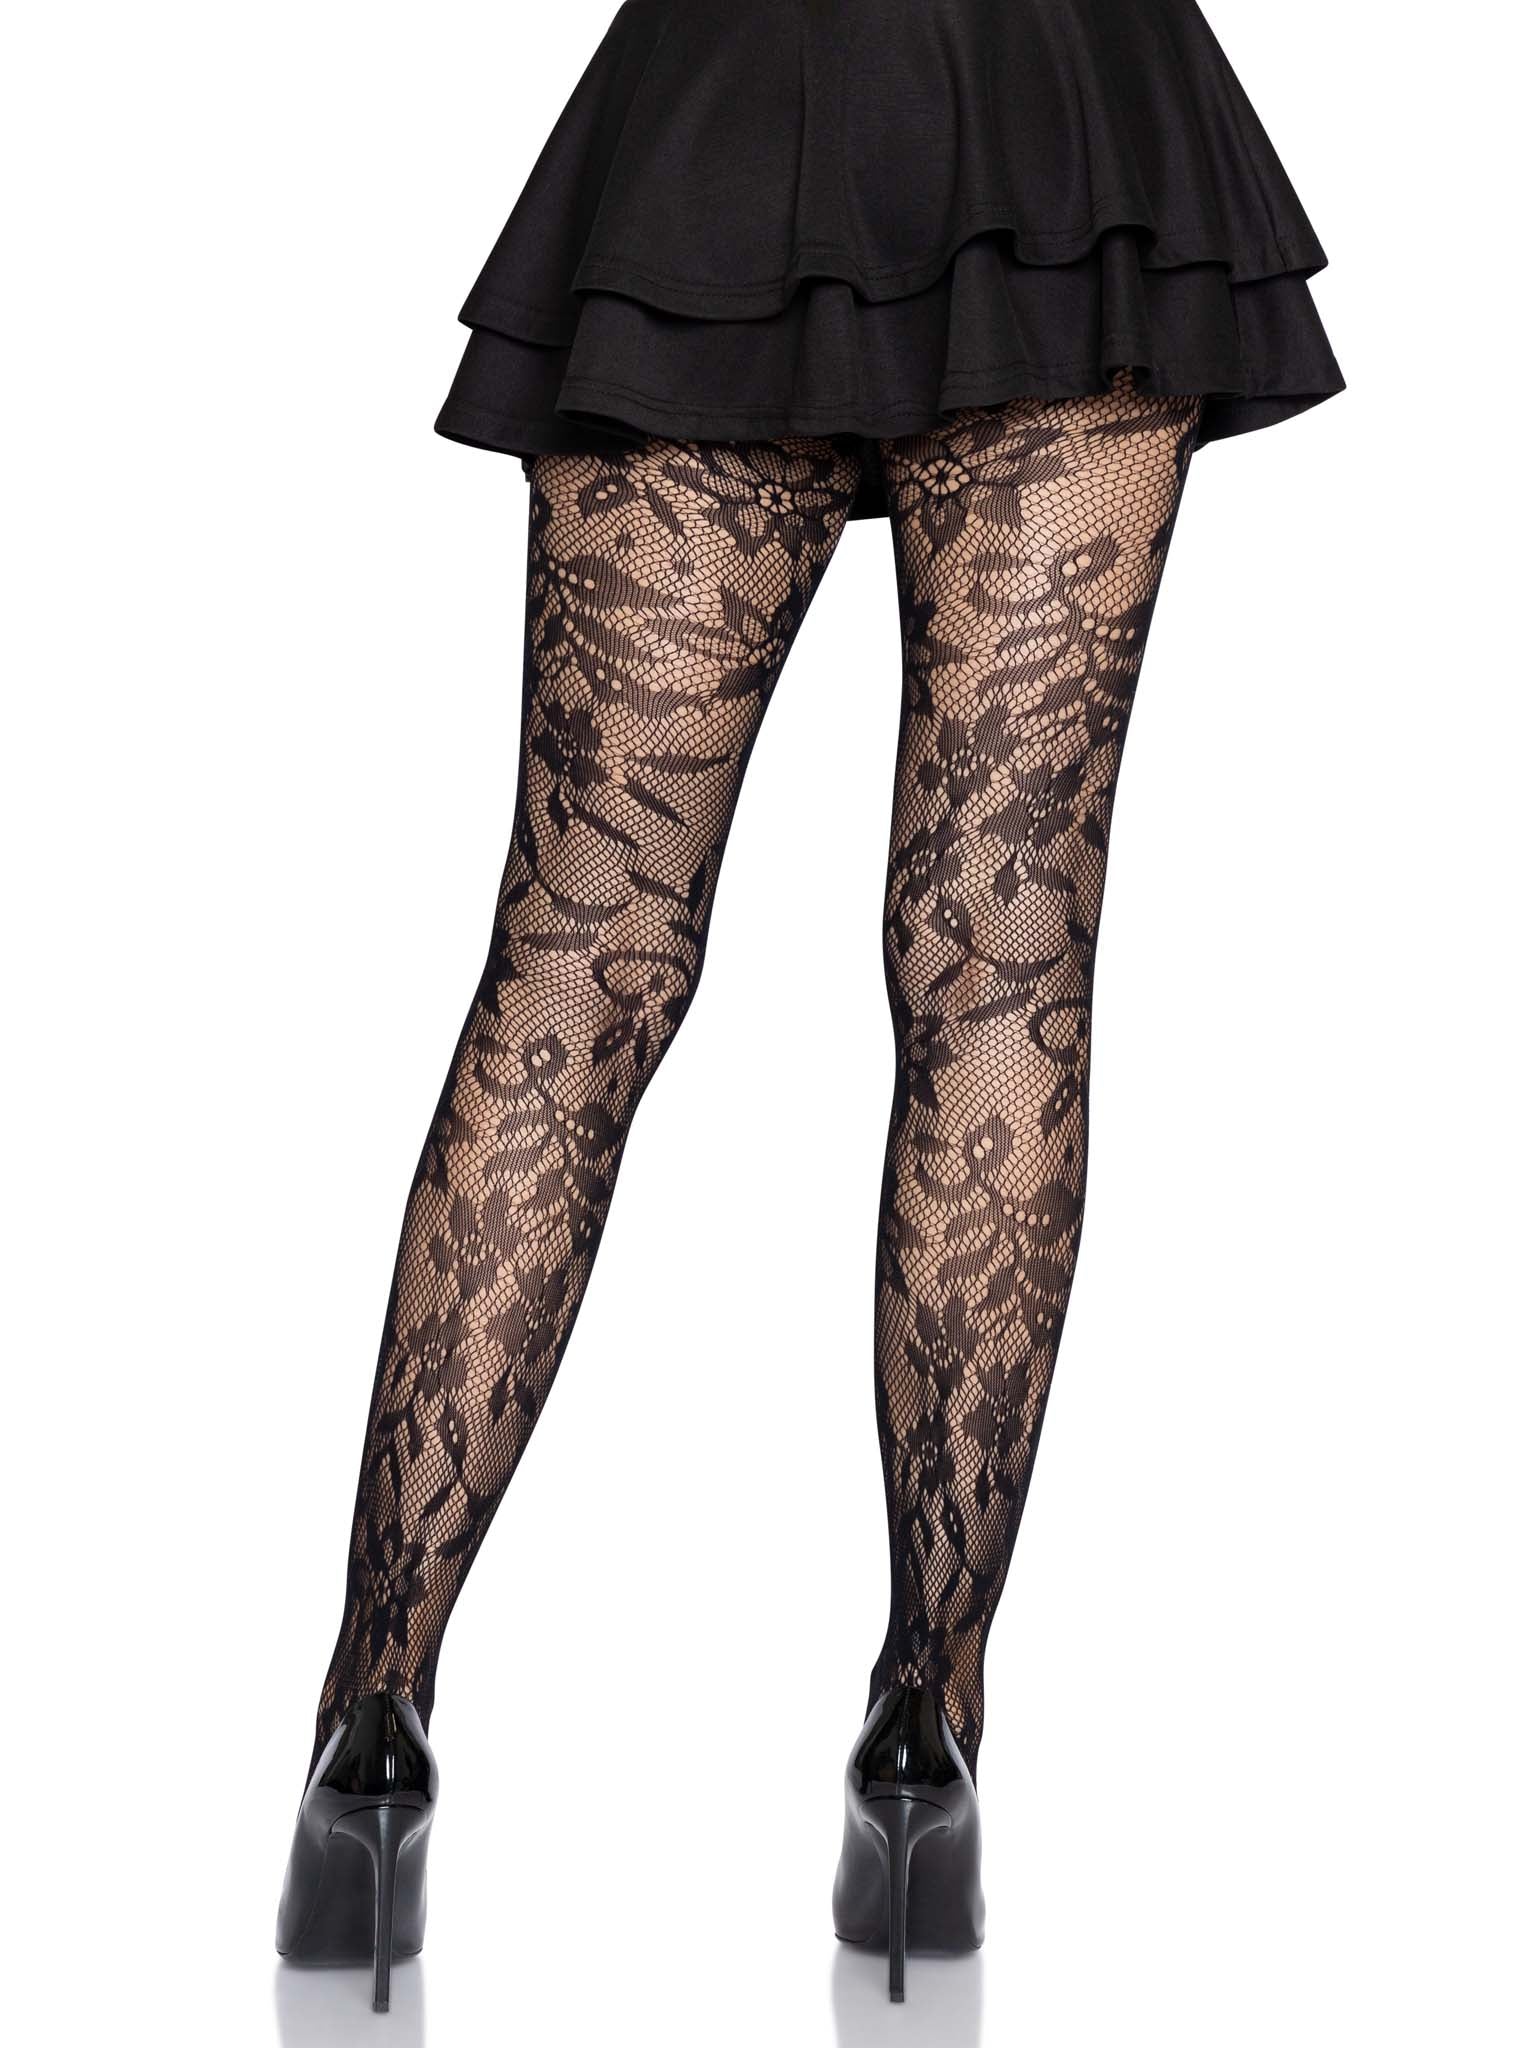 LACE PANEL PATTERNED TIGHTS By Flirt 8% Elastane Black UK One Size To 42  Hip